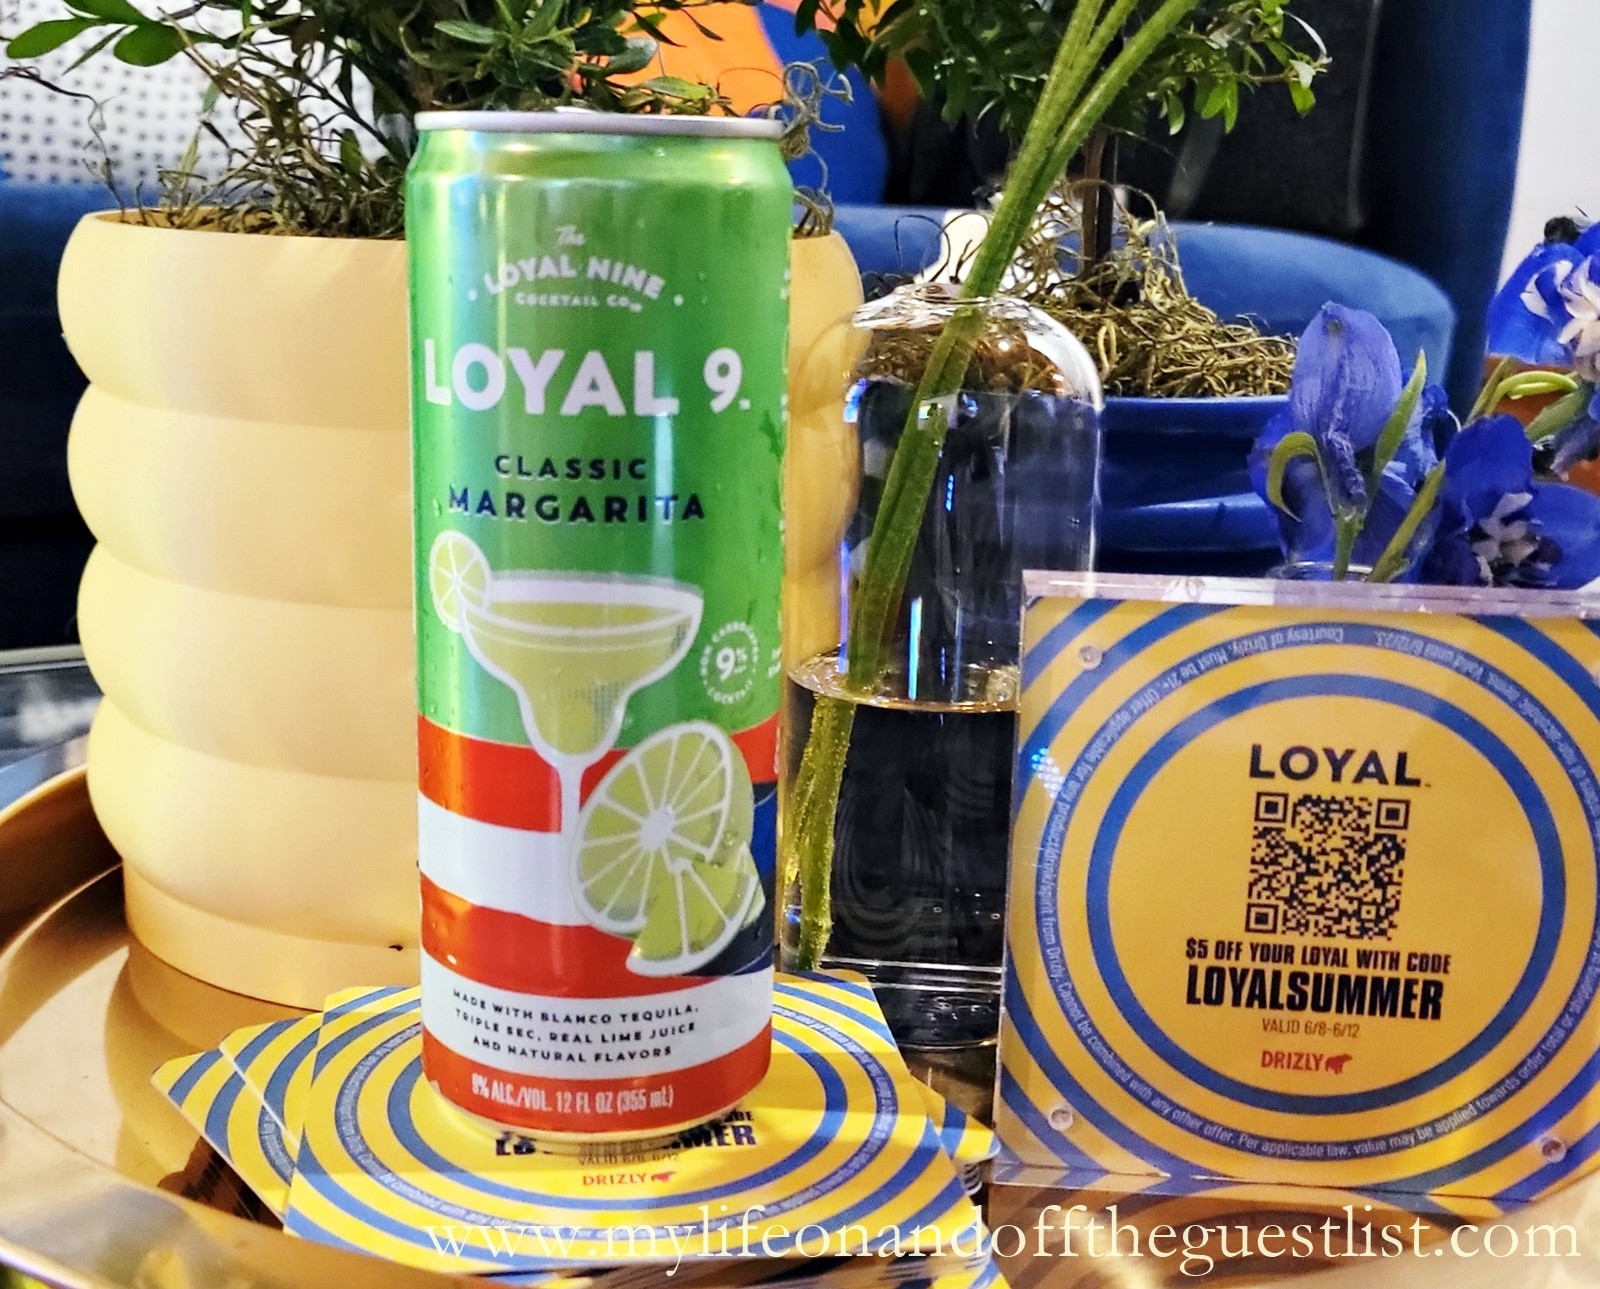 Loyal 9 Cocktails Wants You to Have Less Week & More Weekend